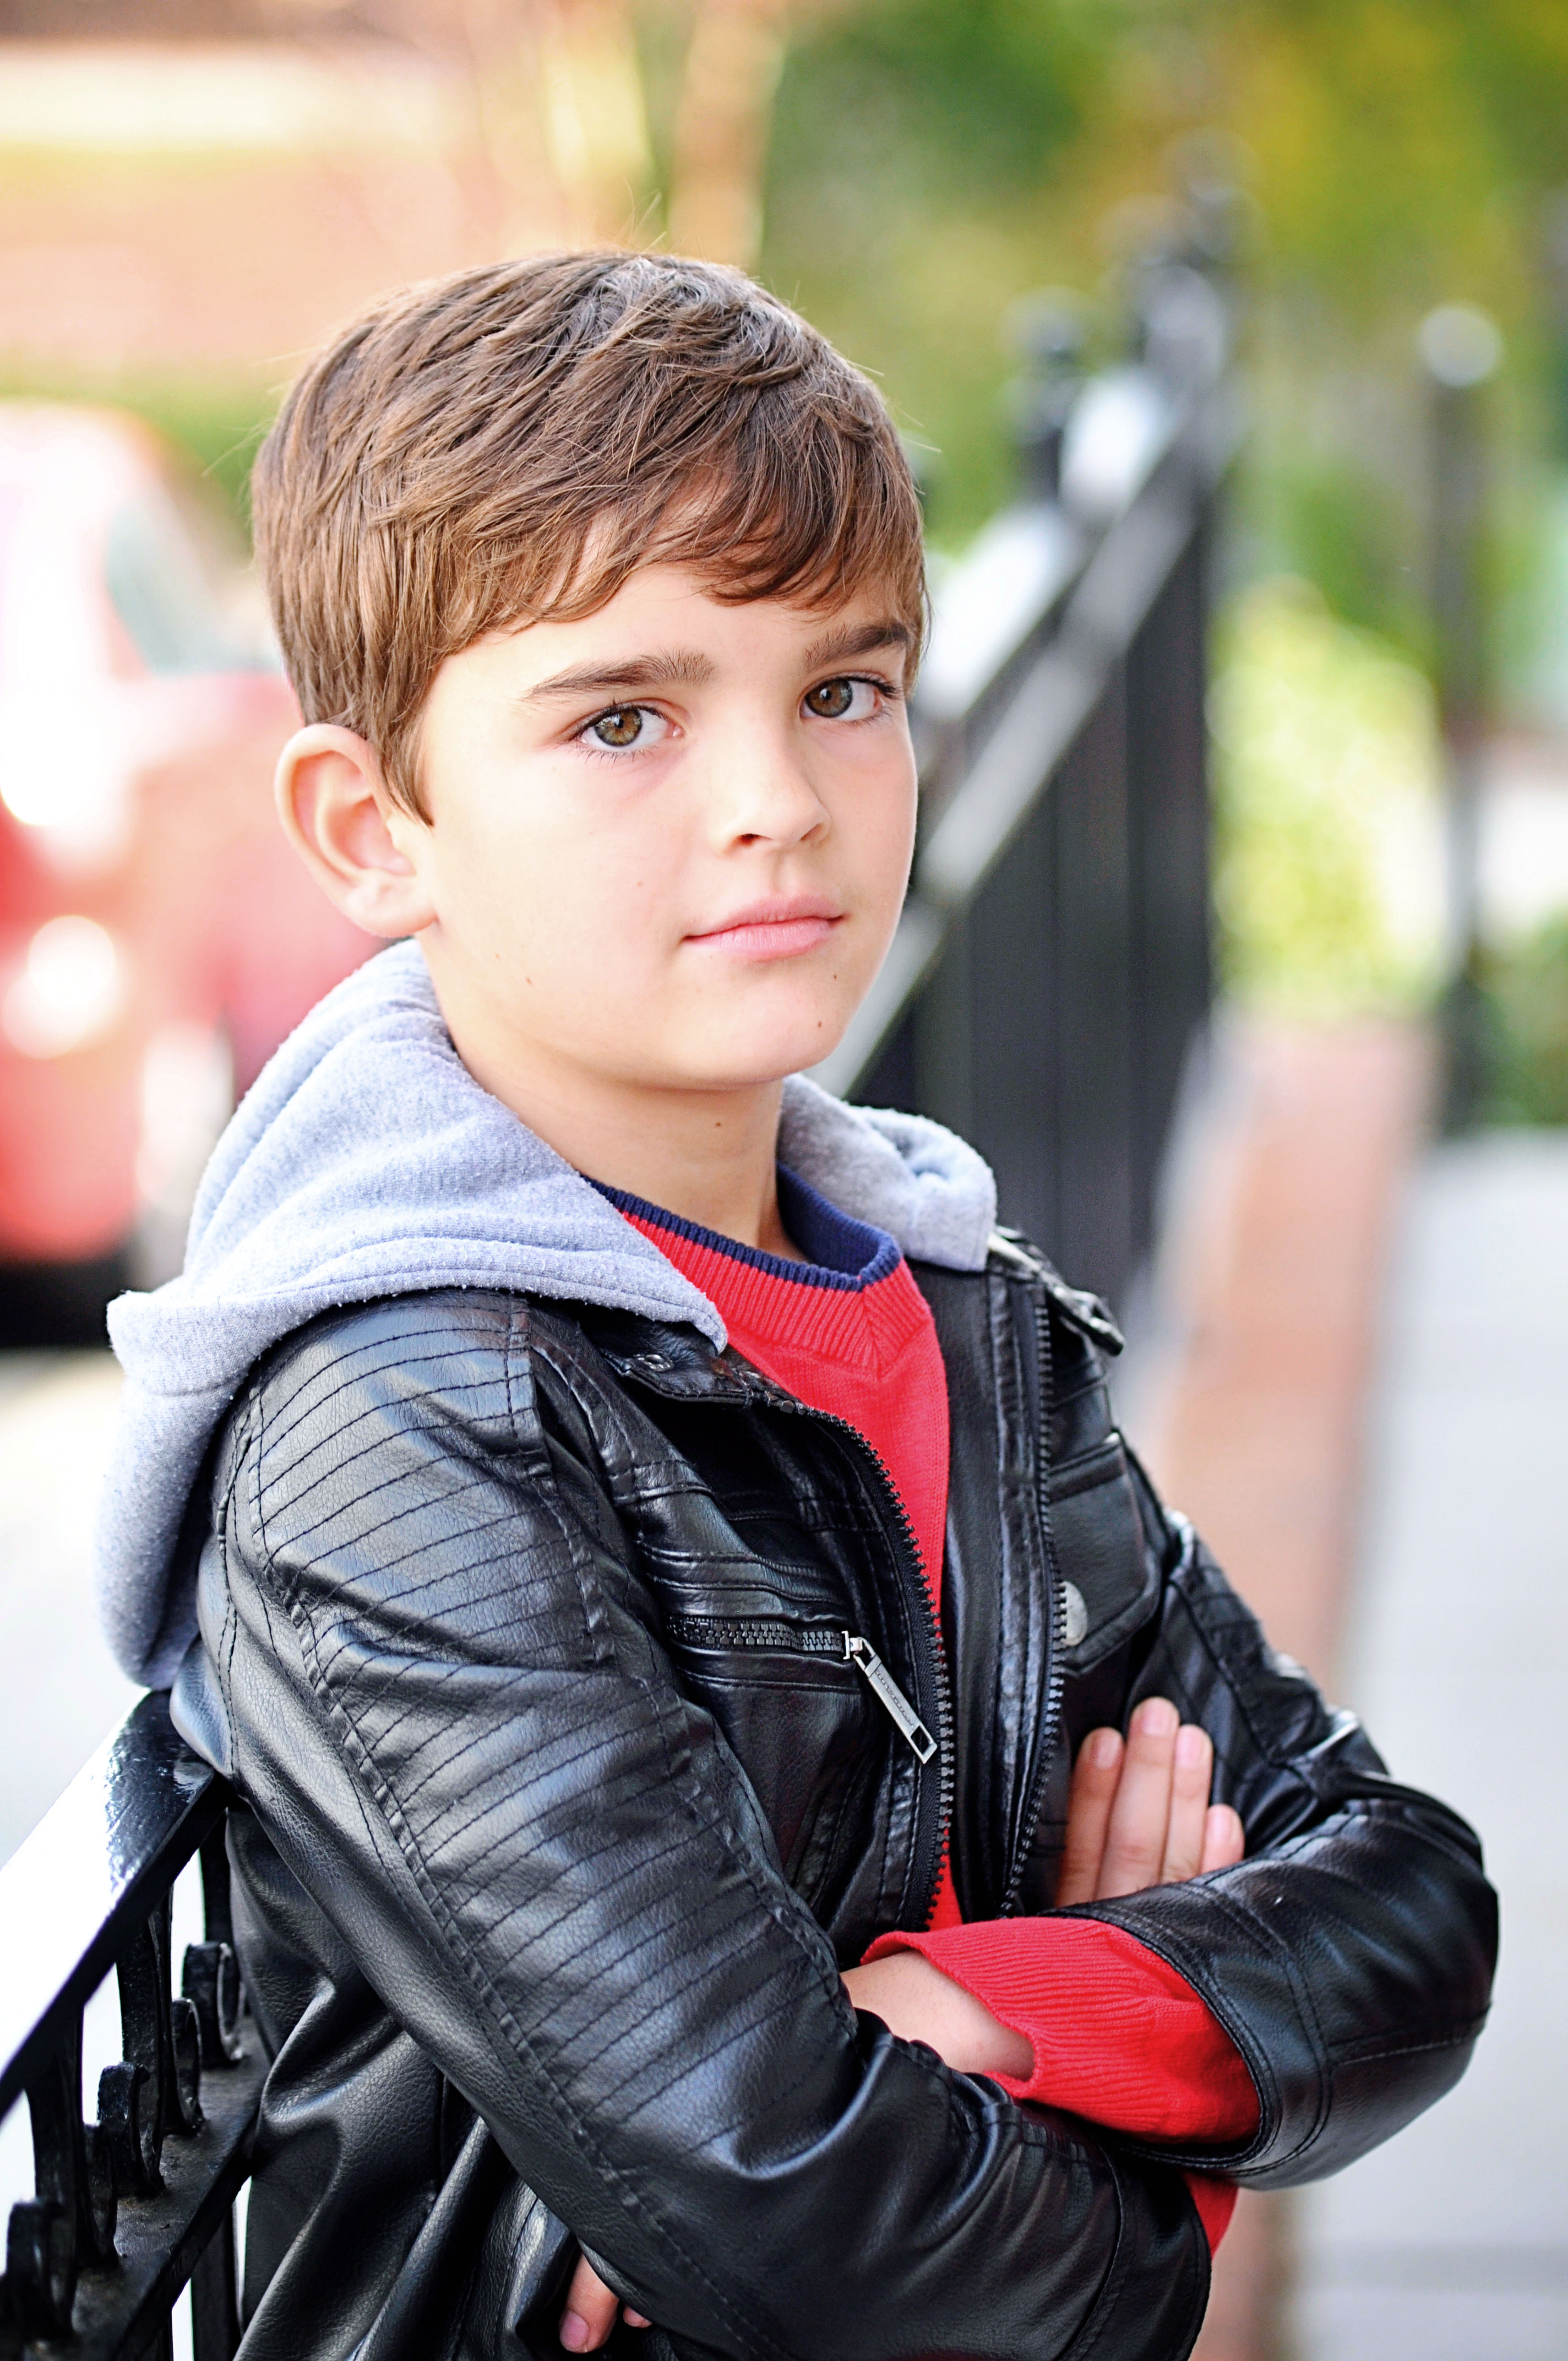 Chris Day - Actor 9 years old